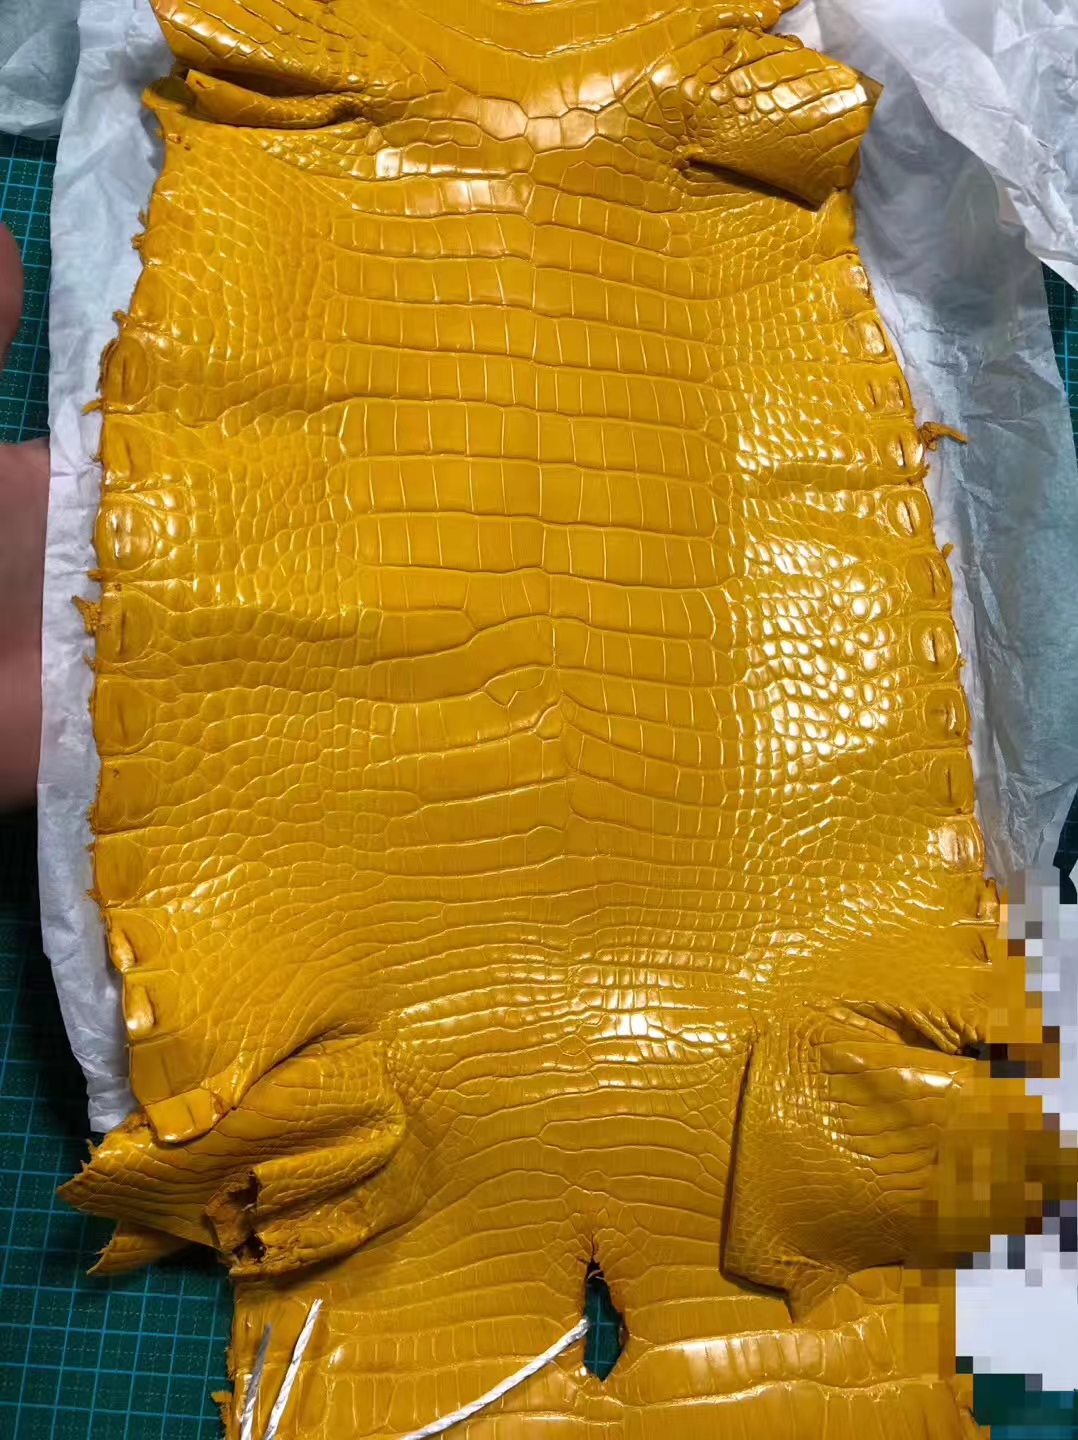 New Arrival Hermes Alligator Shiny Crocodile Leather in 9D Ambre Yellow